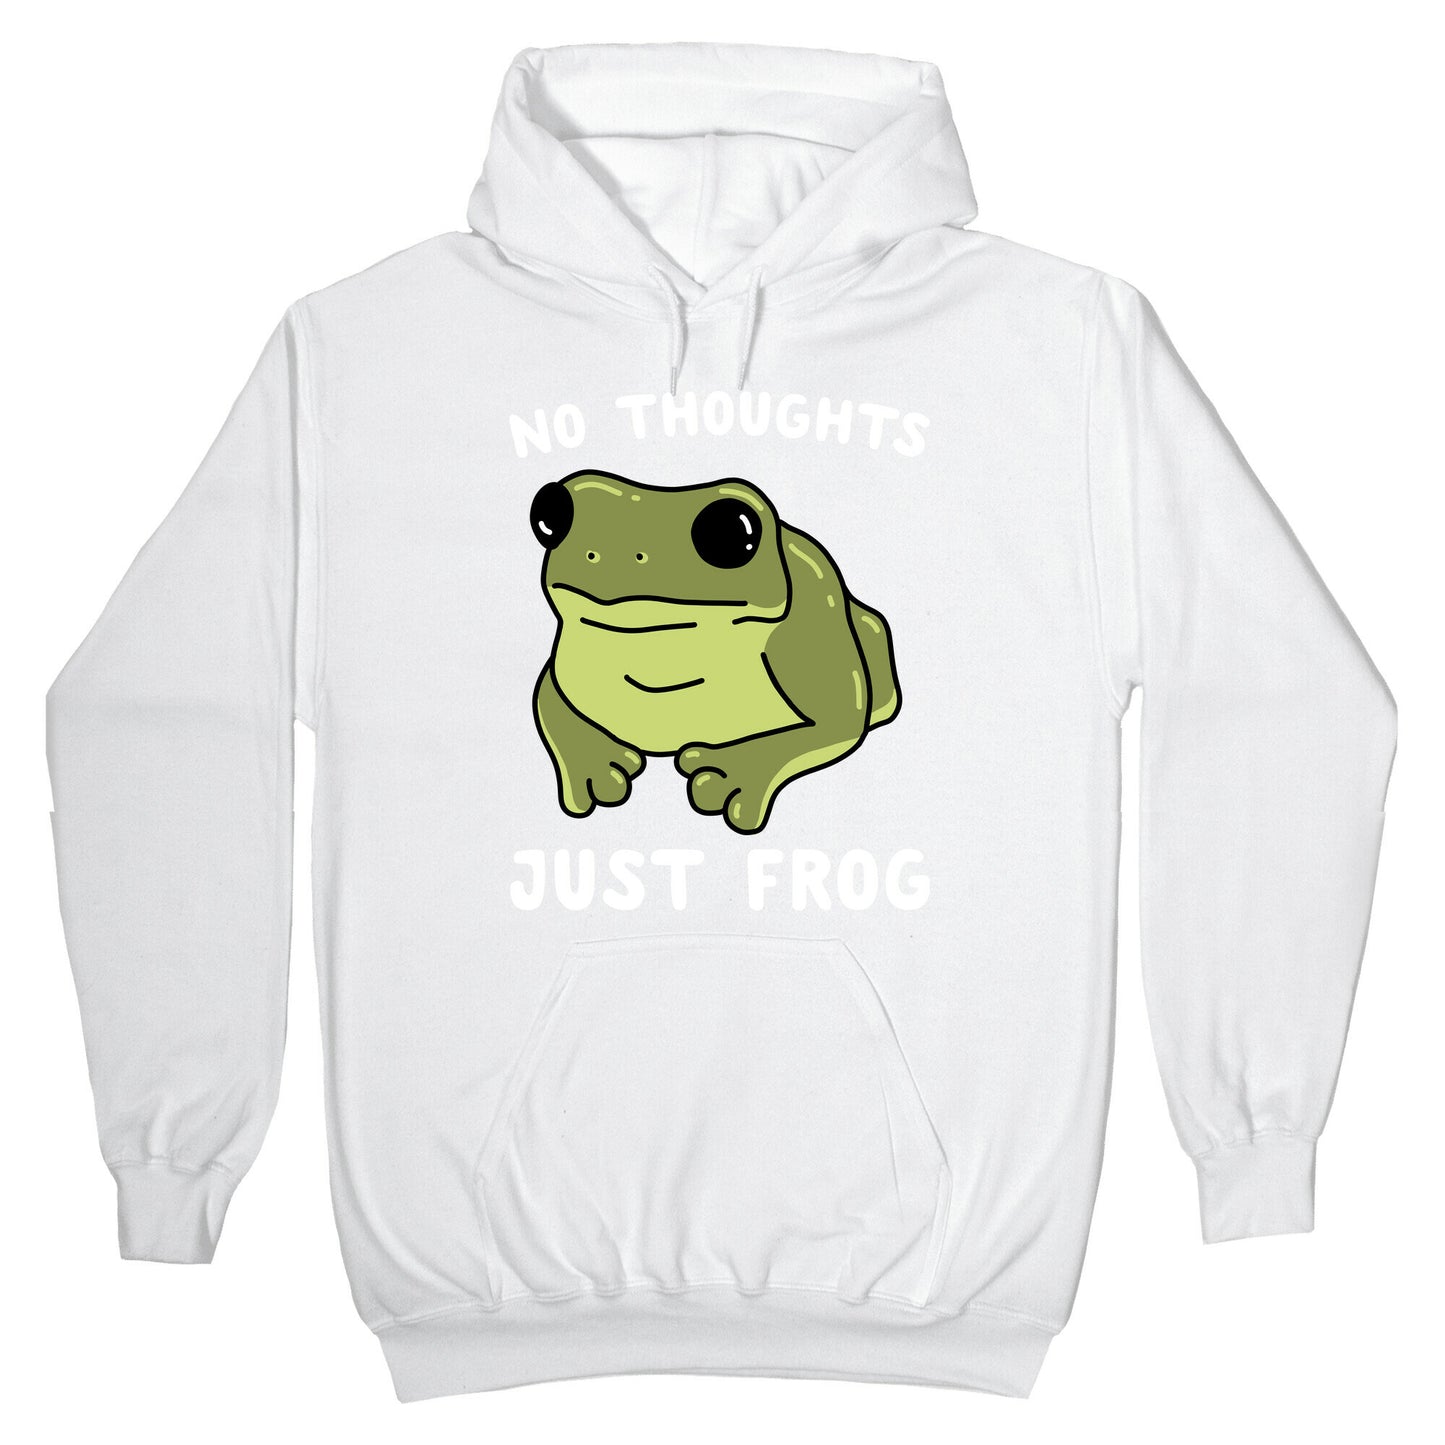 No Thoughts, Just Frog Hoodie